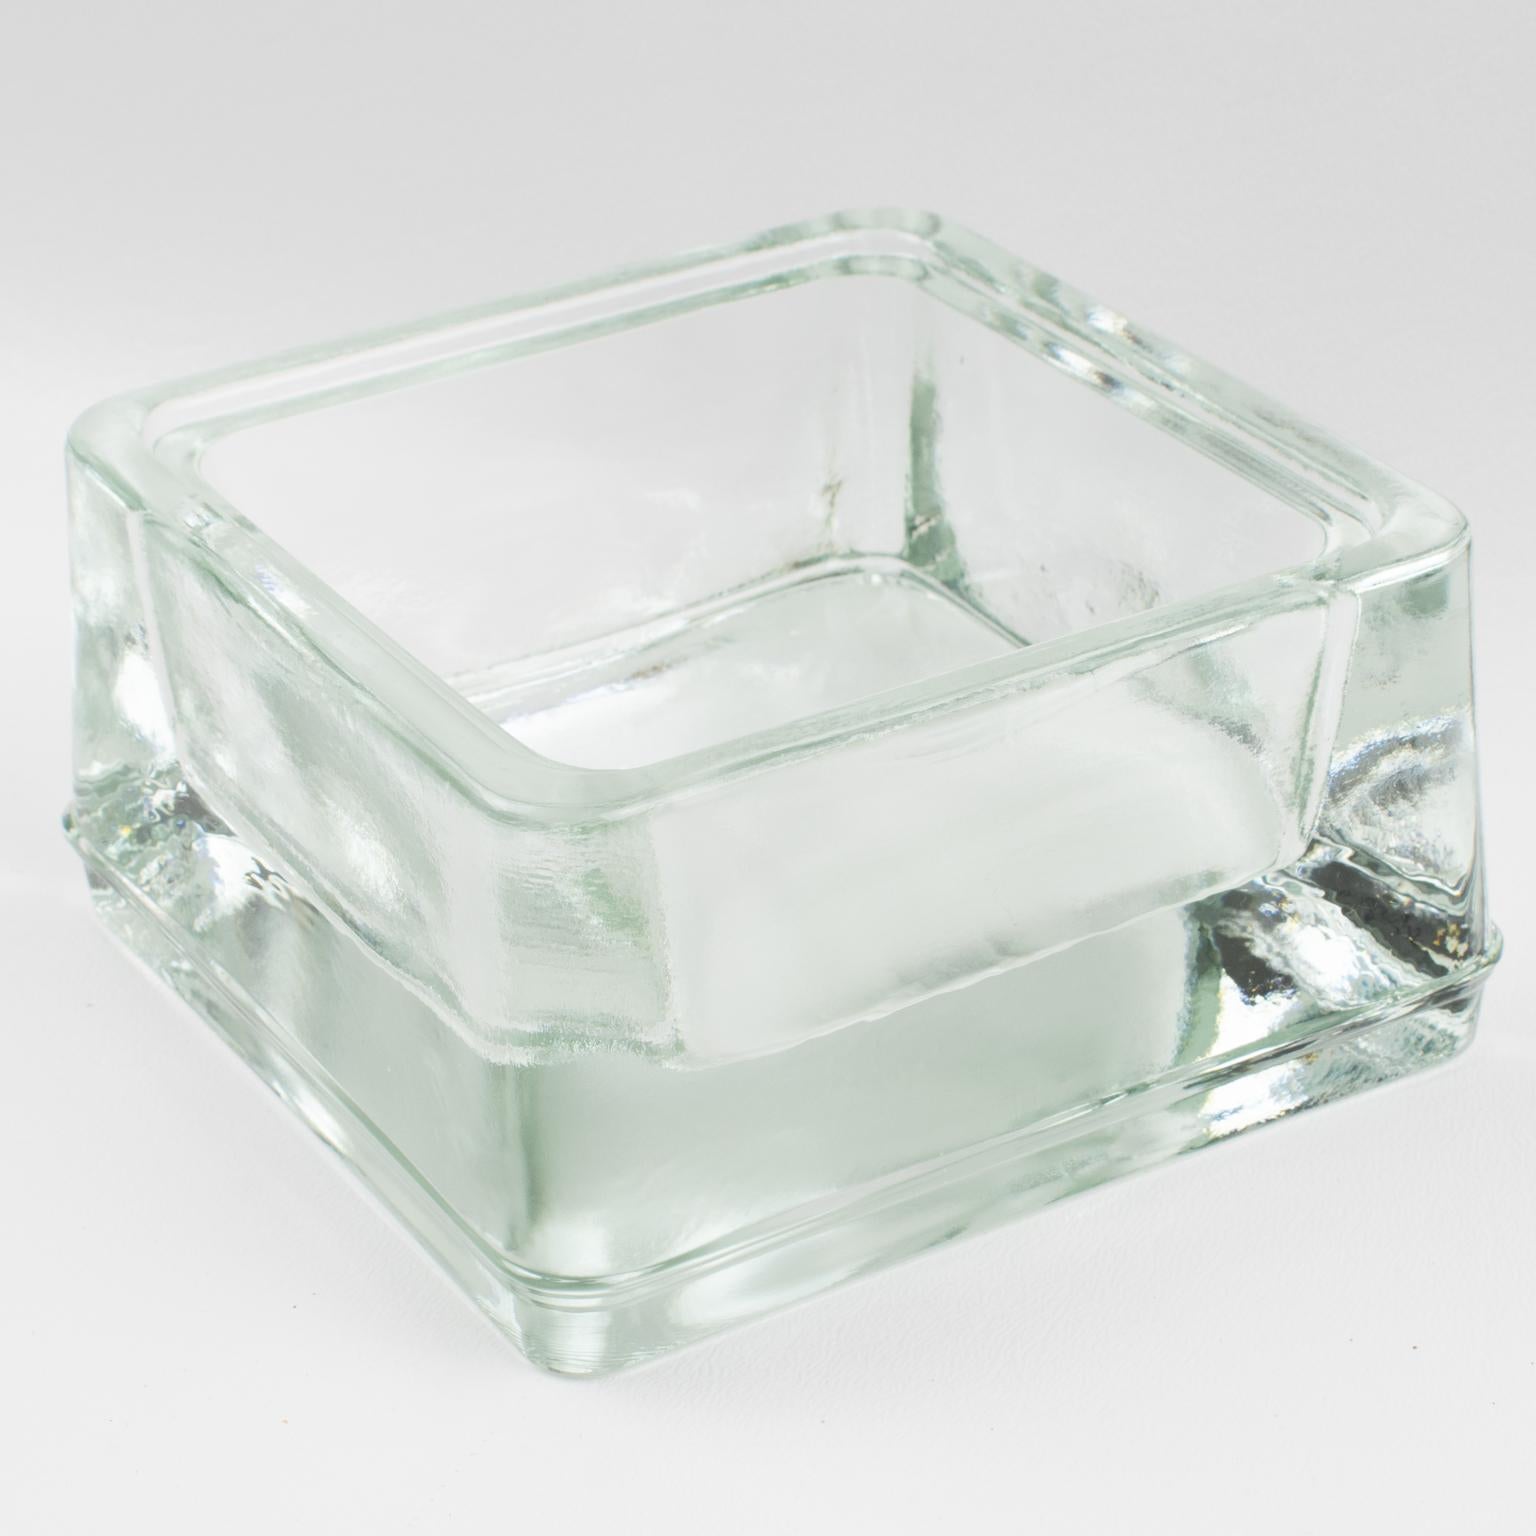 Mid-Century Modern Lumax Molded Glass Desk Accessory Ashtray Catchall, Design by Le Corbusier For Sale